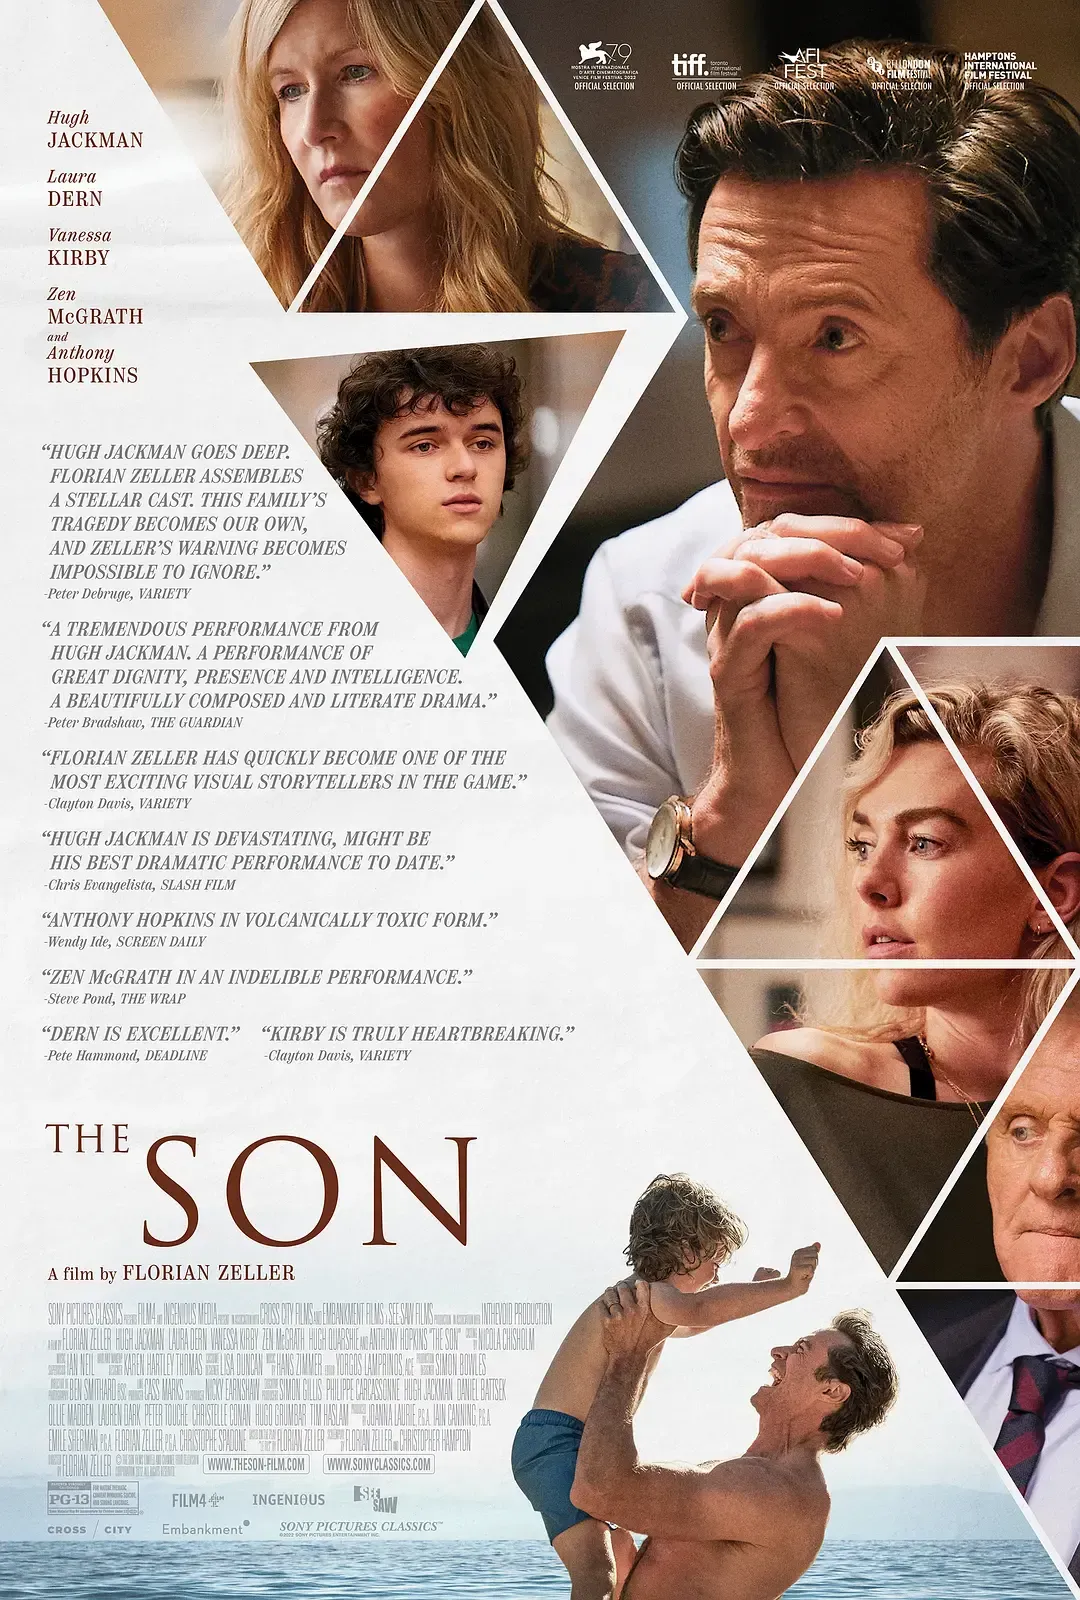 'The Son‎' Review: This literary film by Hugh Jackman is quite sad | FMV6